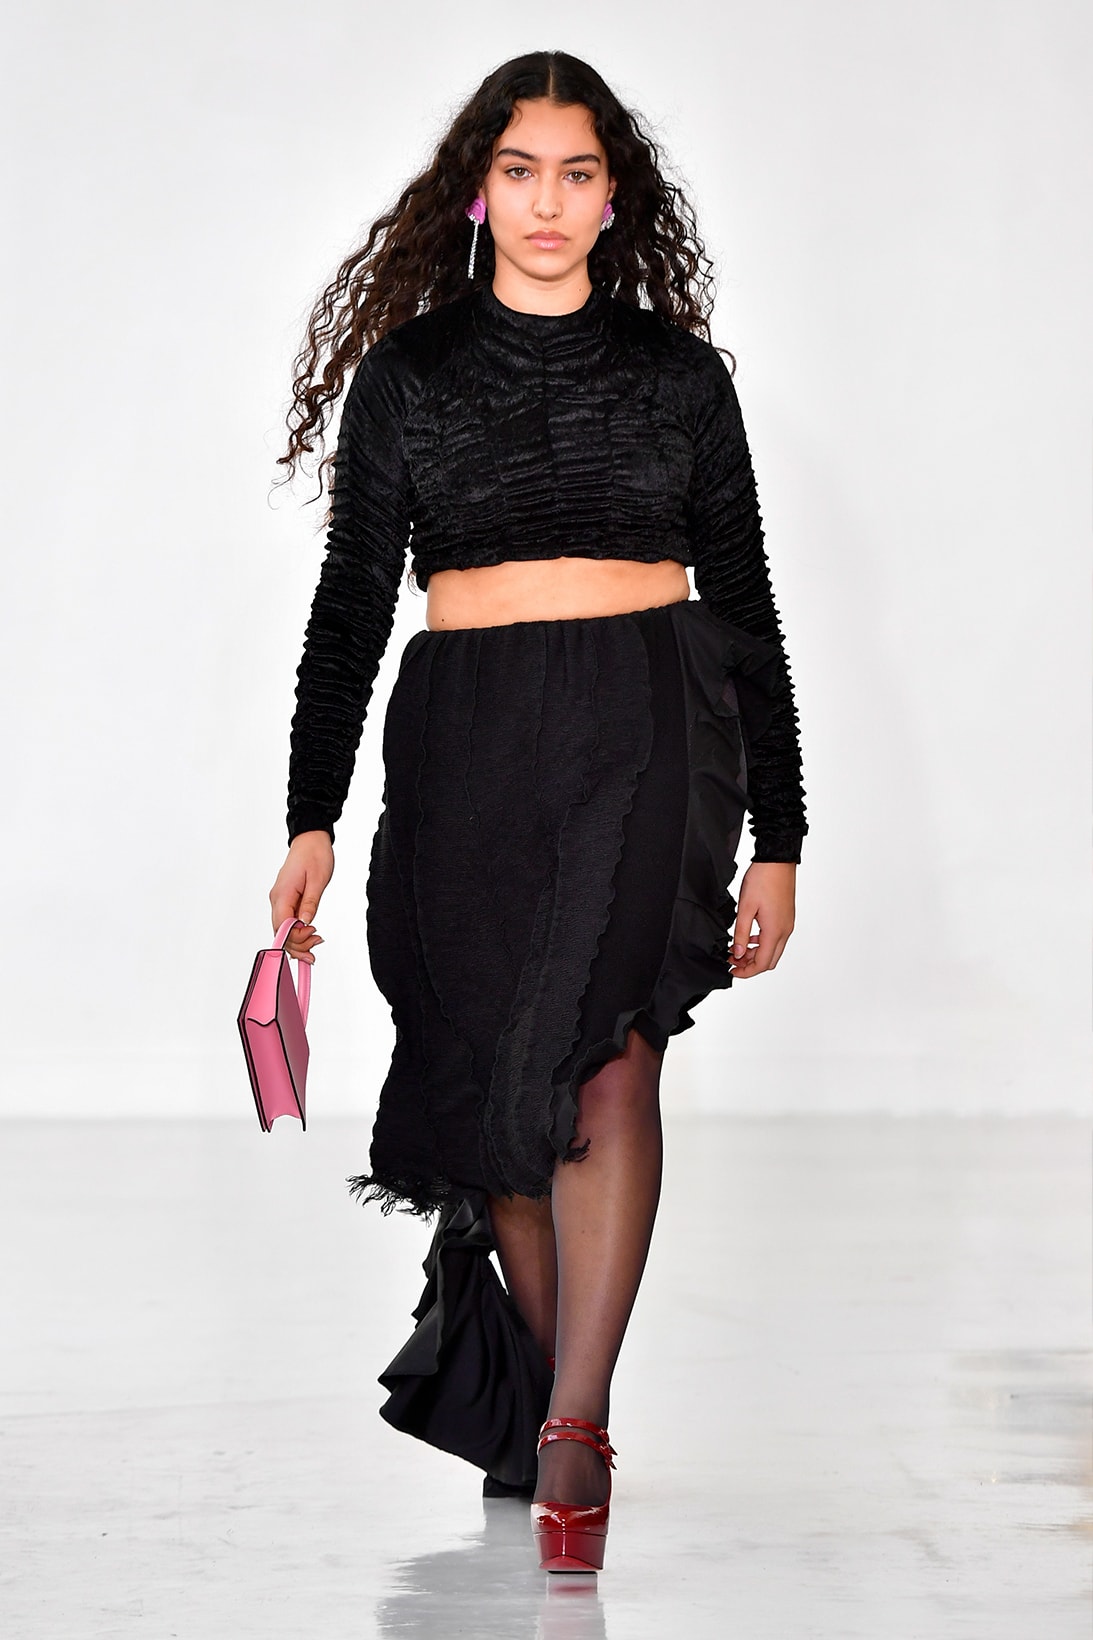 Ester Manas Fall Winter Collection Size Inclusivity Cut-Outs Fashion Week Runway Show Photos Top Skirt Black